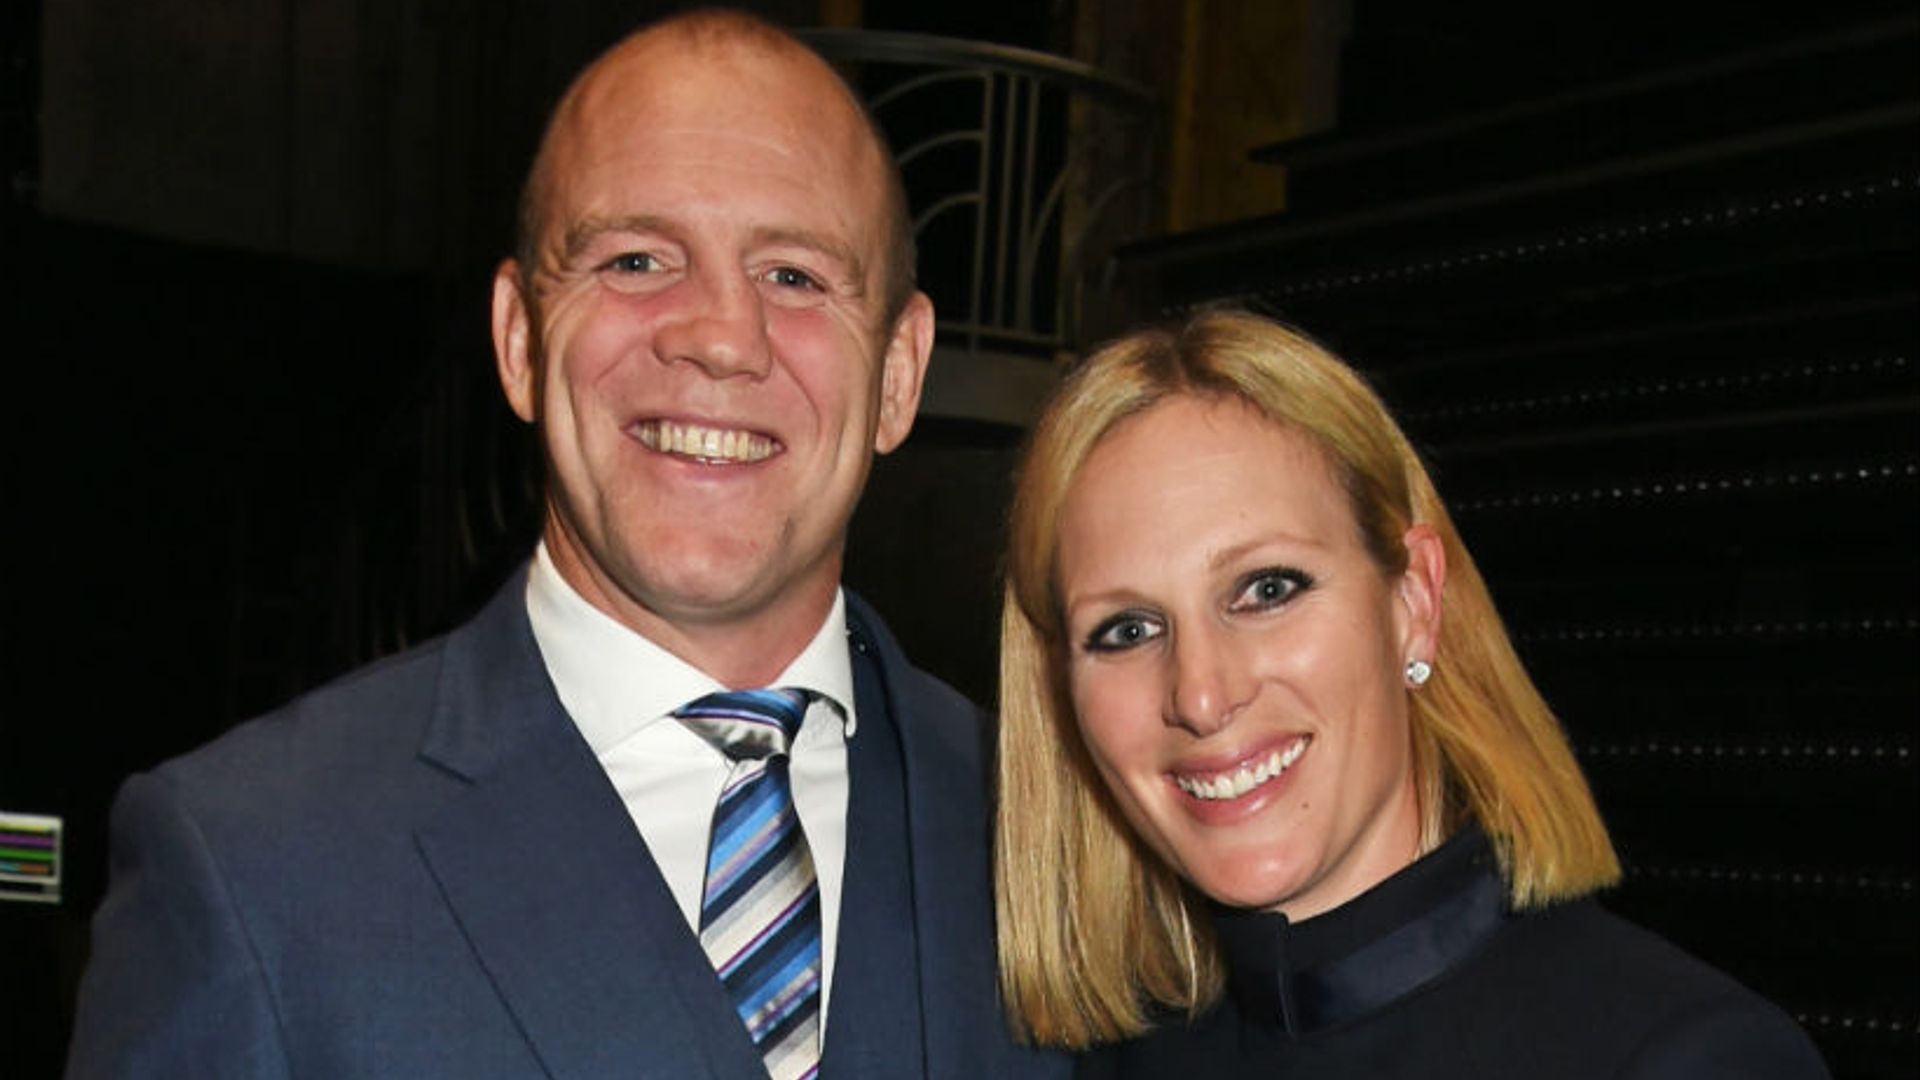 How Mike and Zara Tindall are spending their days before their baby arrives